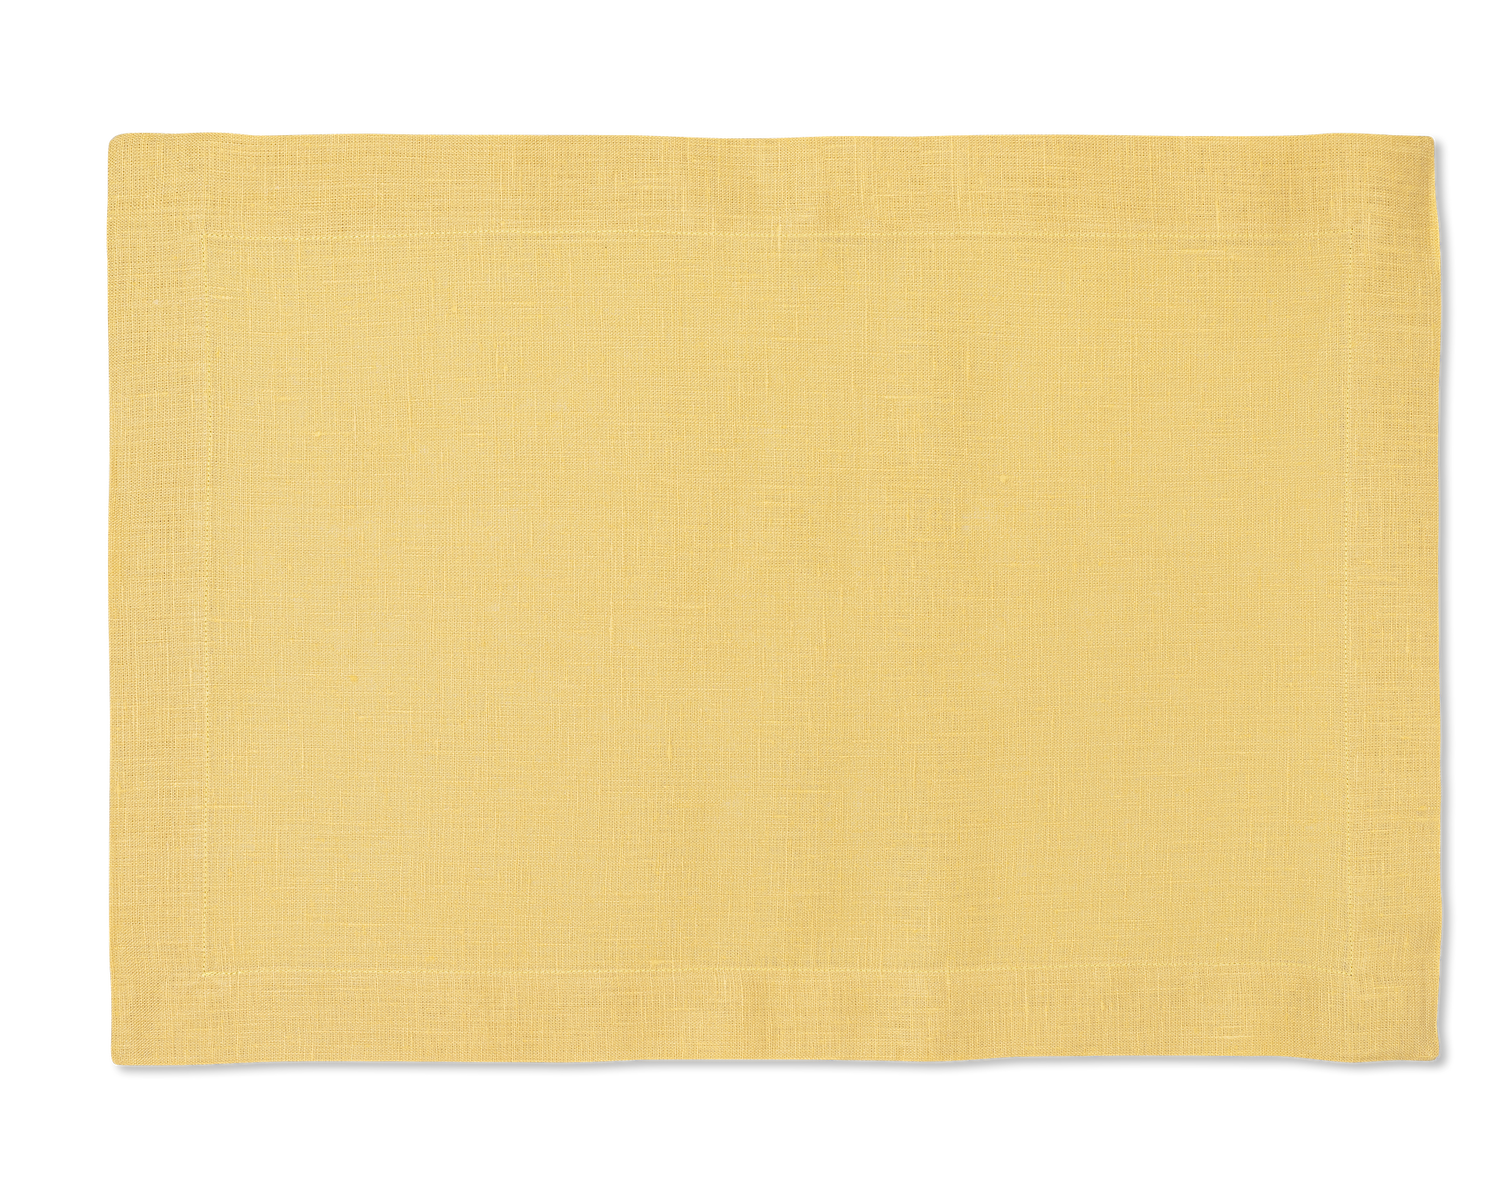 A linen placemat in the color butter